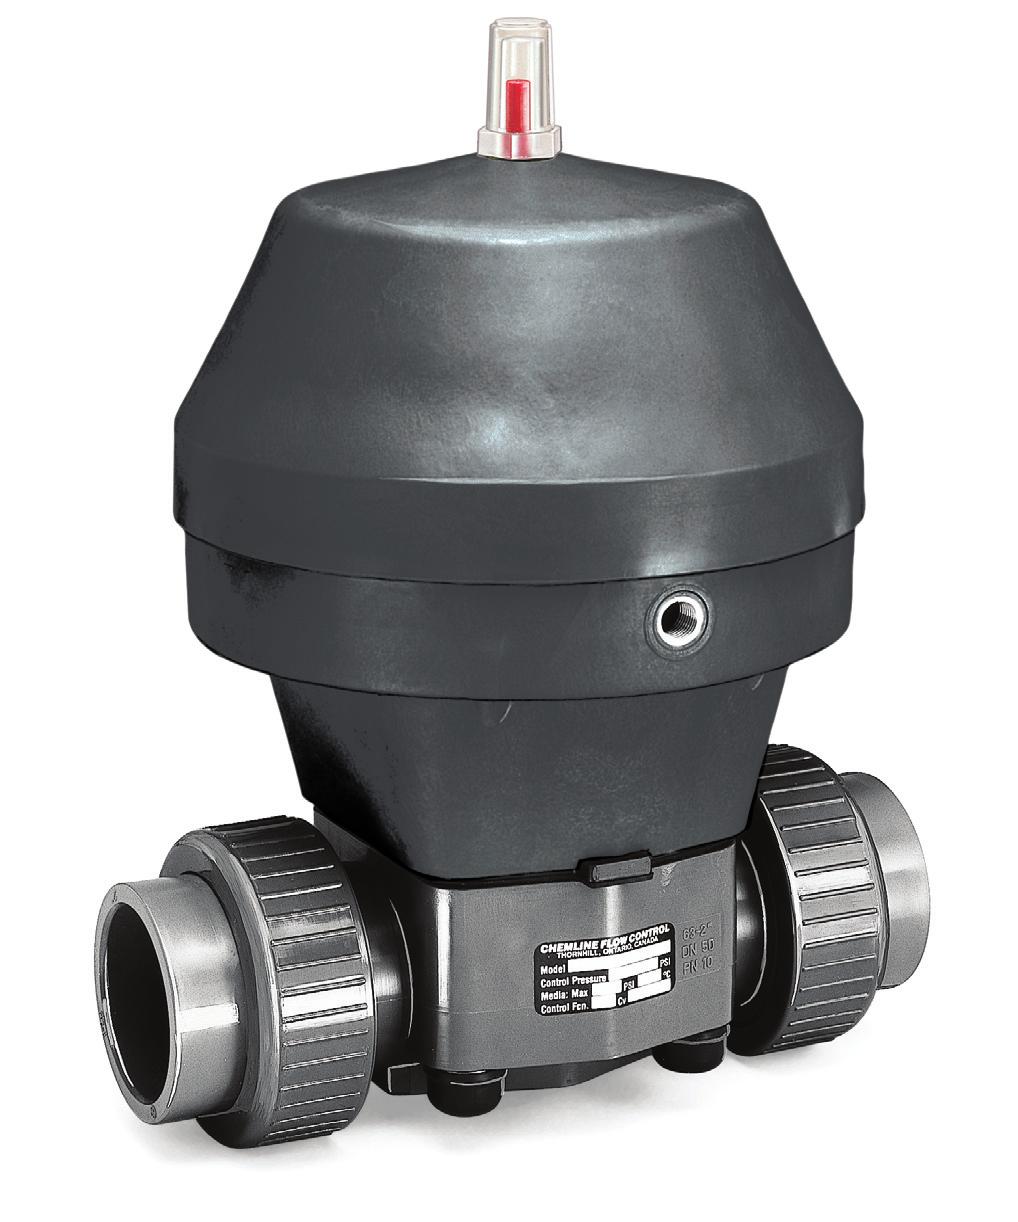 PDF Published March 1, 2013 Type 7 Diaphragm Valves PVC CPVC PP PVDF pneumatically actuated SERIES: Type 7 SIZES: 1/2 4 ENDS: DIAPHRAGMS: True Union Socket, Threaded or ChemFlare TM1 Spigot 2 bodies